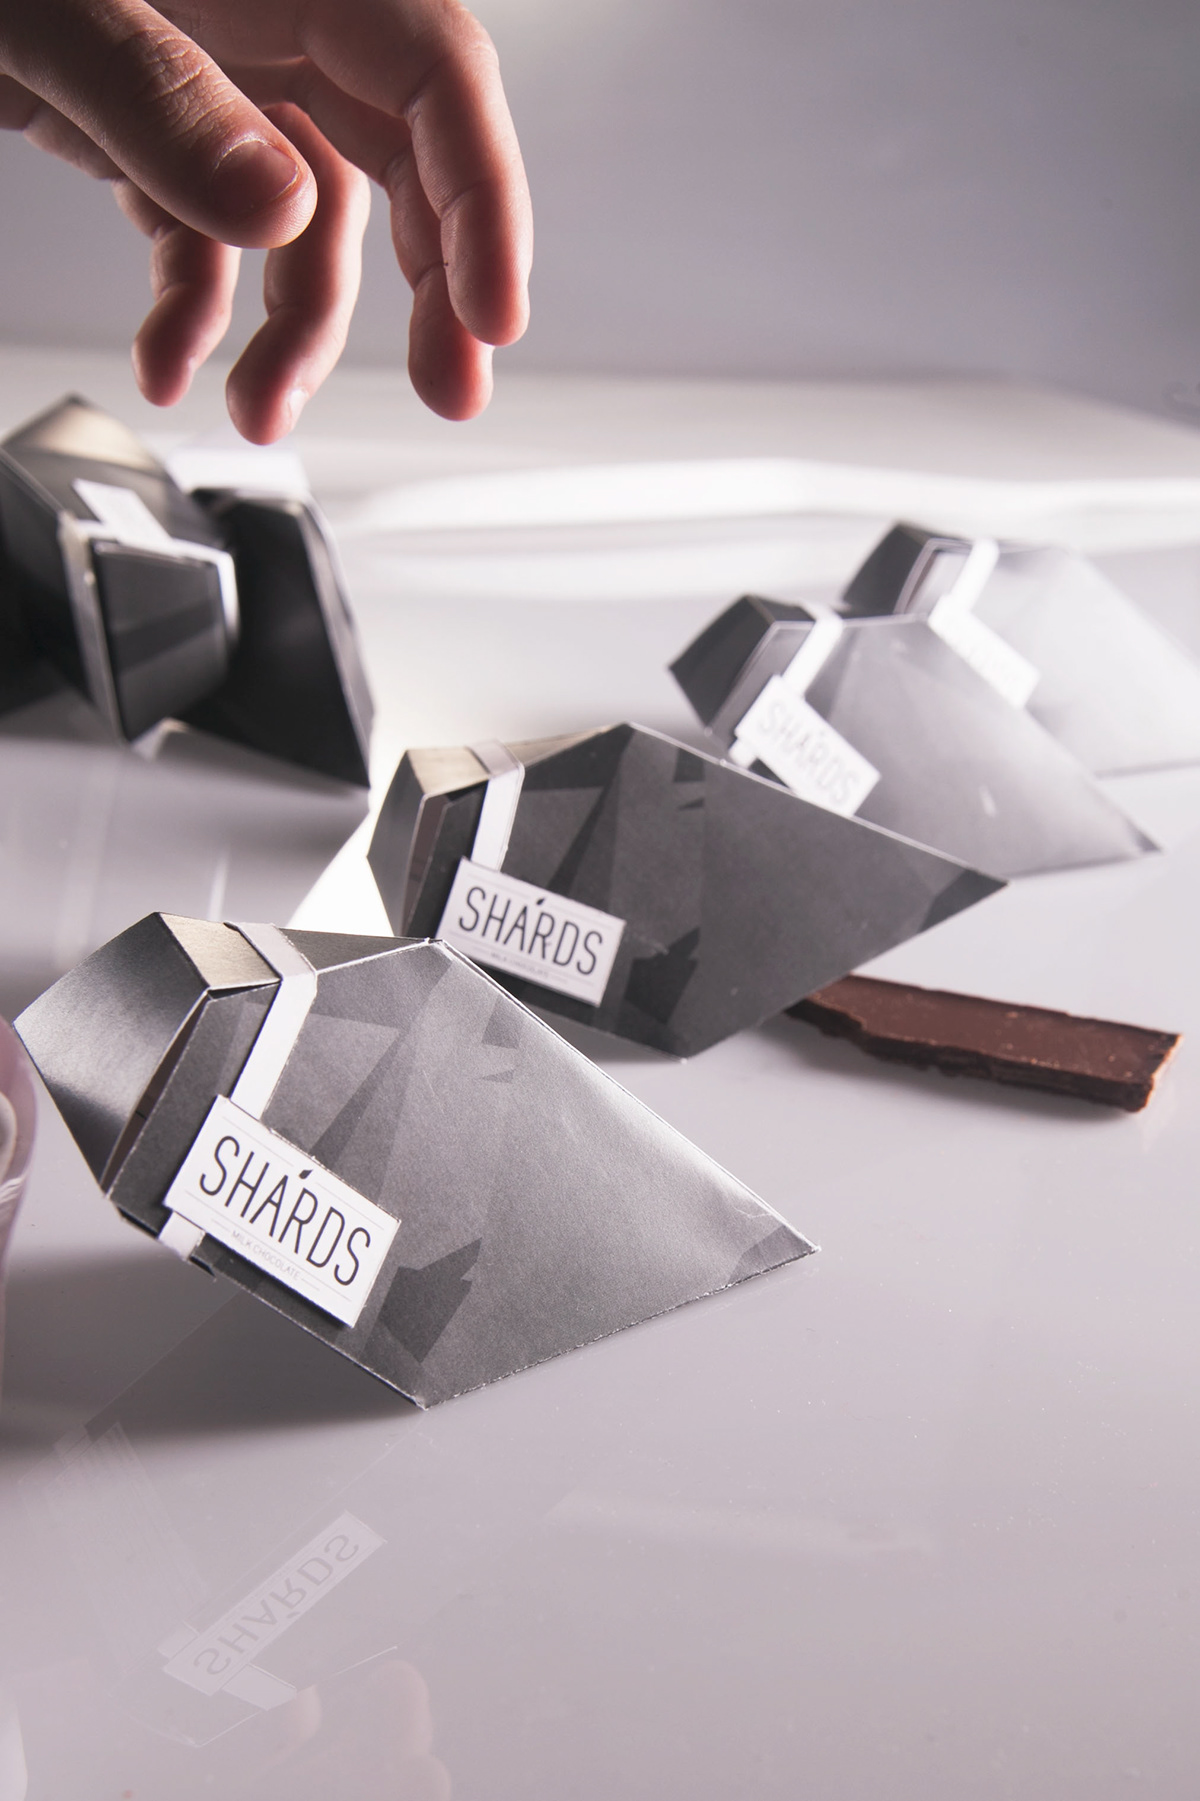 chocolate package shard glass paper black grey papercraft craft